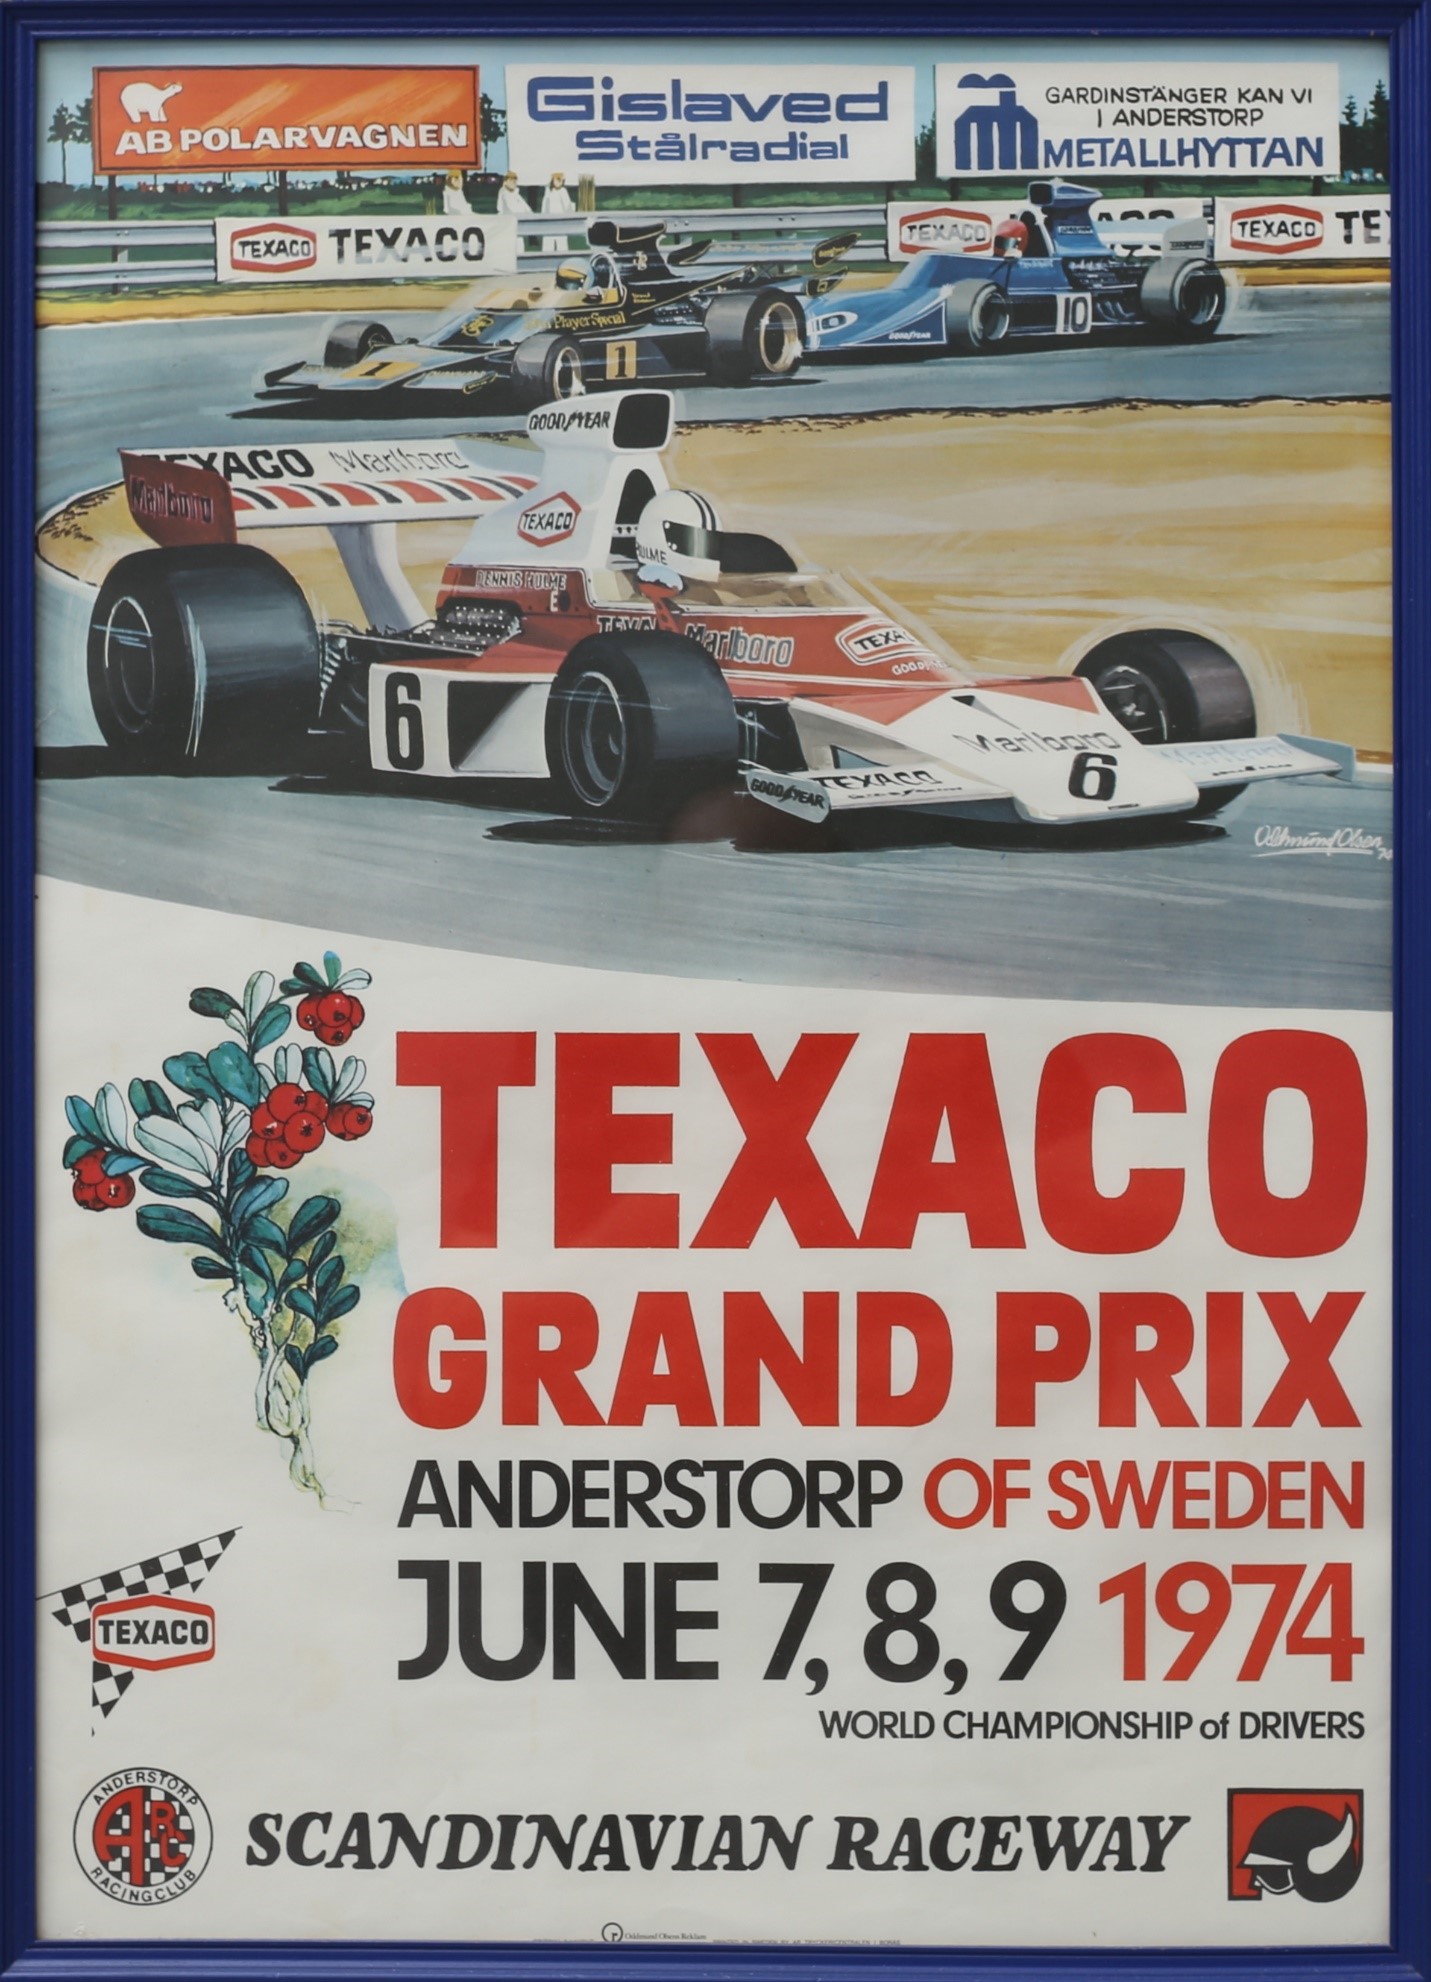 A poster of the 1974 Swedish Grand Prix.